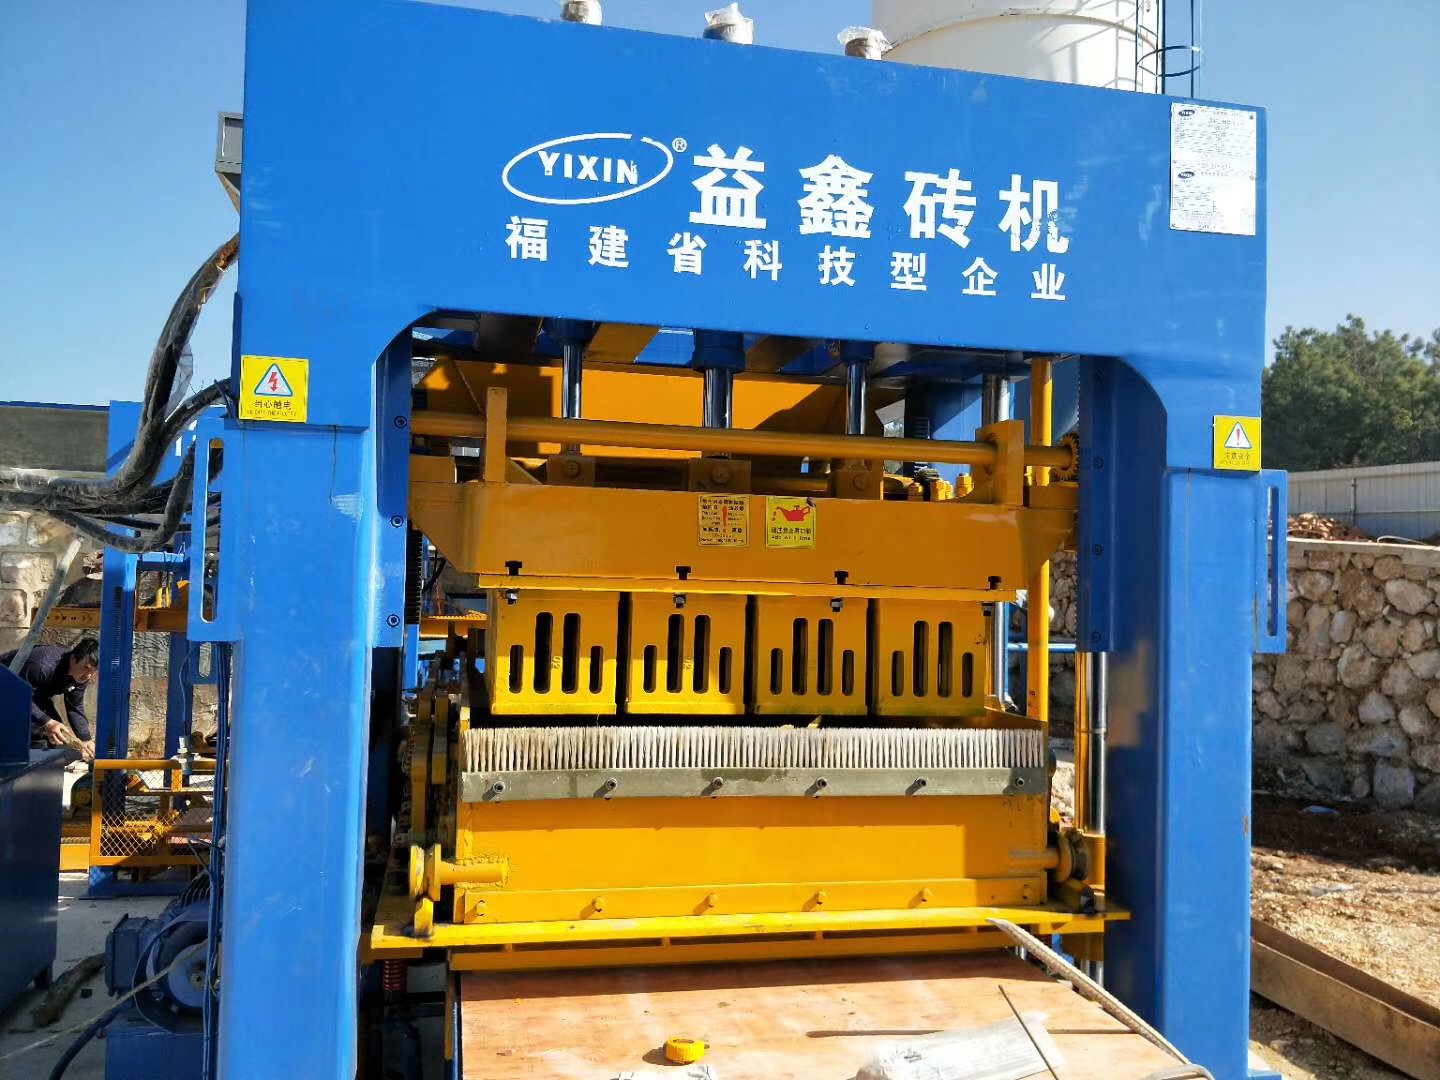 China QT6-15 Concrete Block Making Machine for Start Cement Production Business 